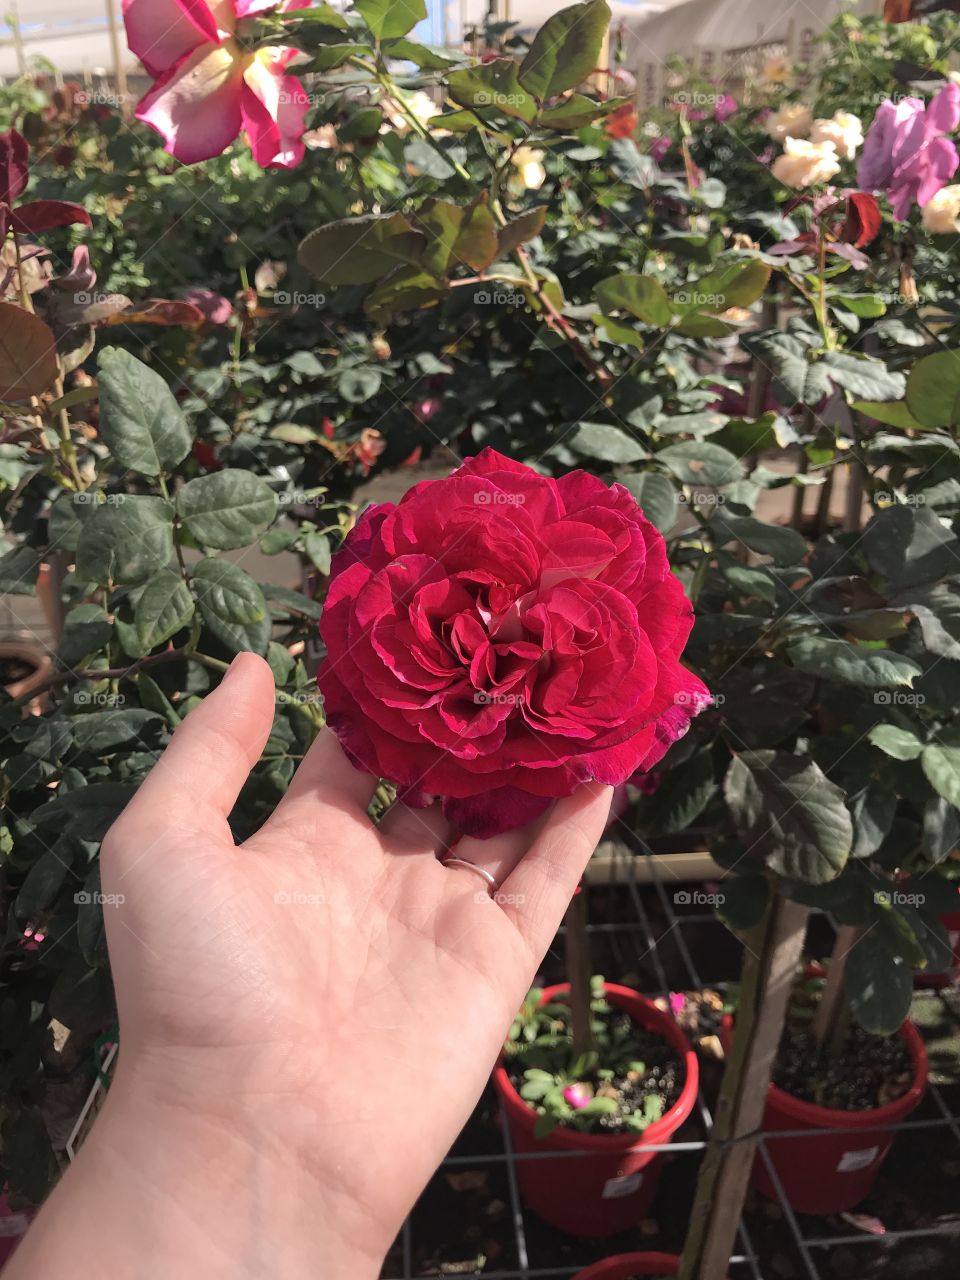 A beautiful photo of a red/pink/purple rose being held up. This was taken in a garden nursery. 